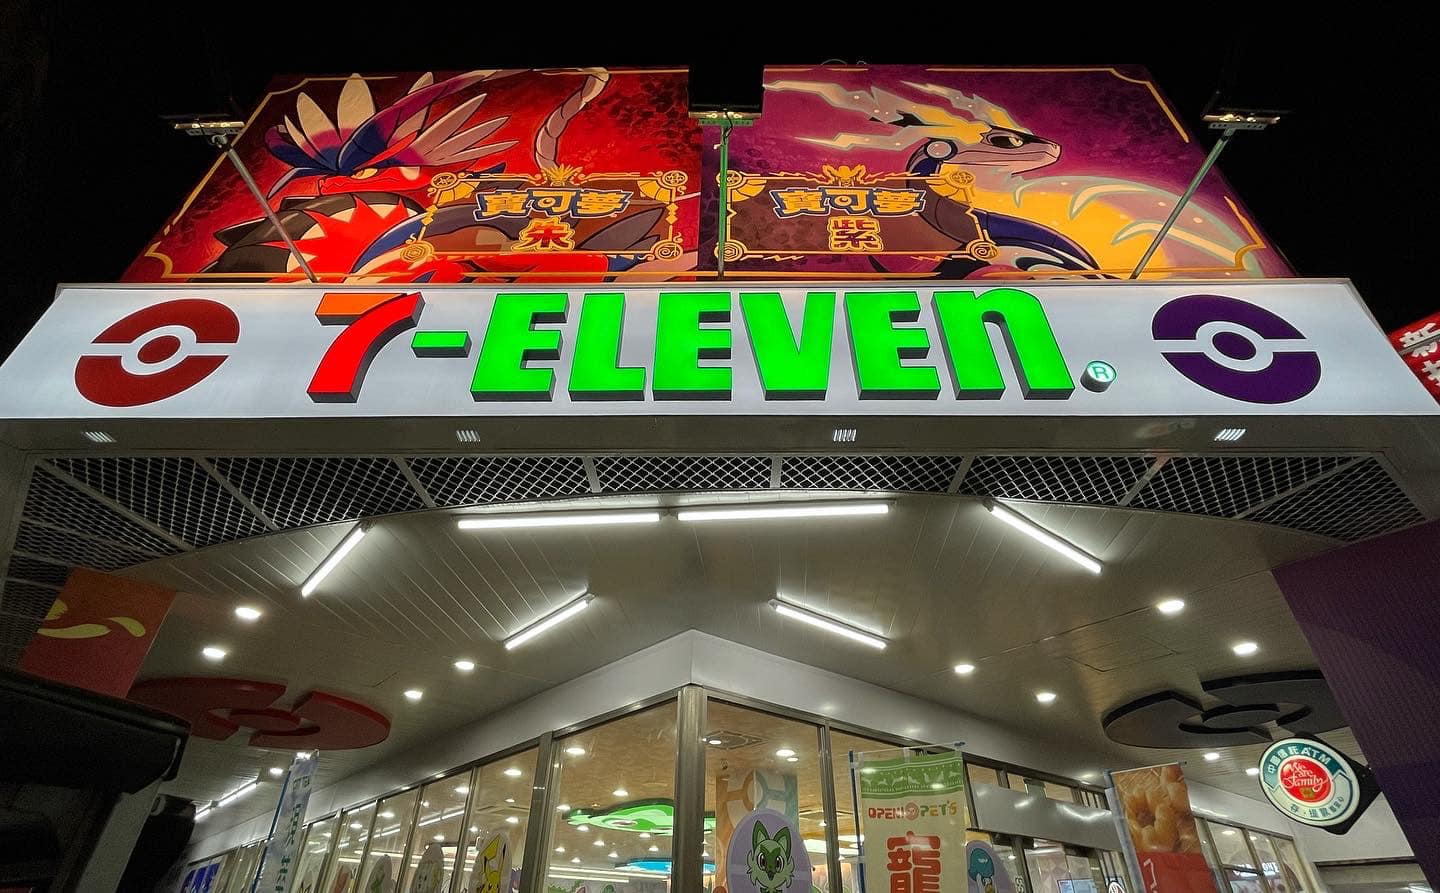 Get Your Pokemon-Themed Metal Straws at Your Nearest 7-Eleven Store 